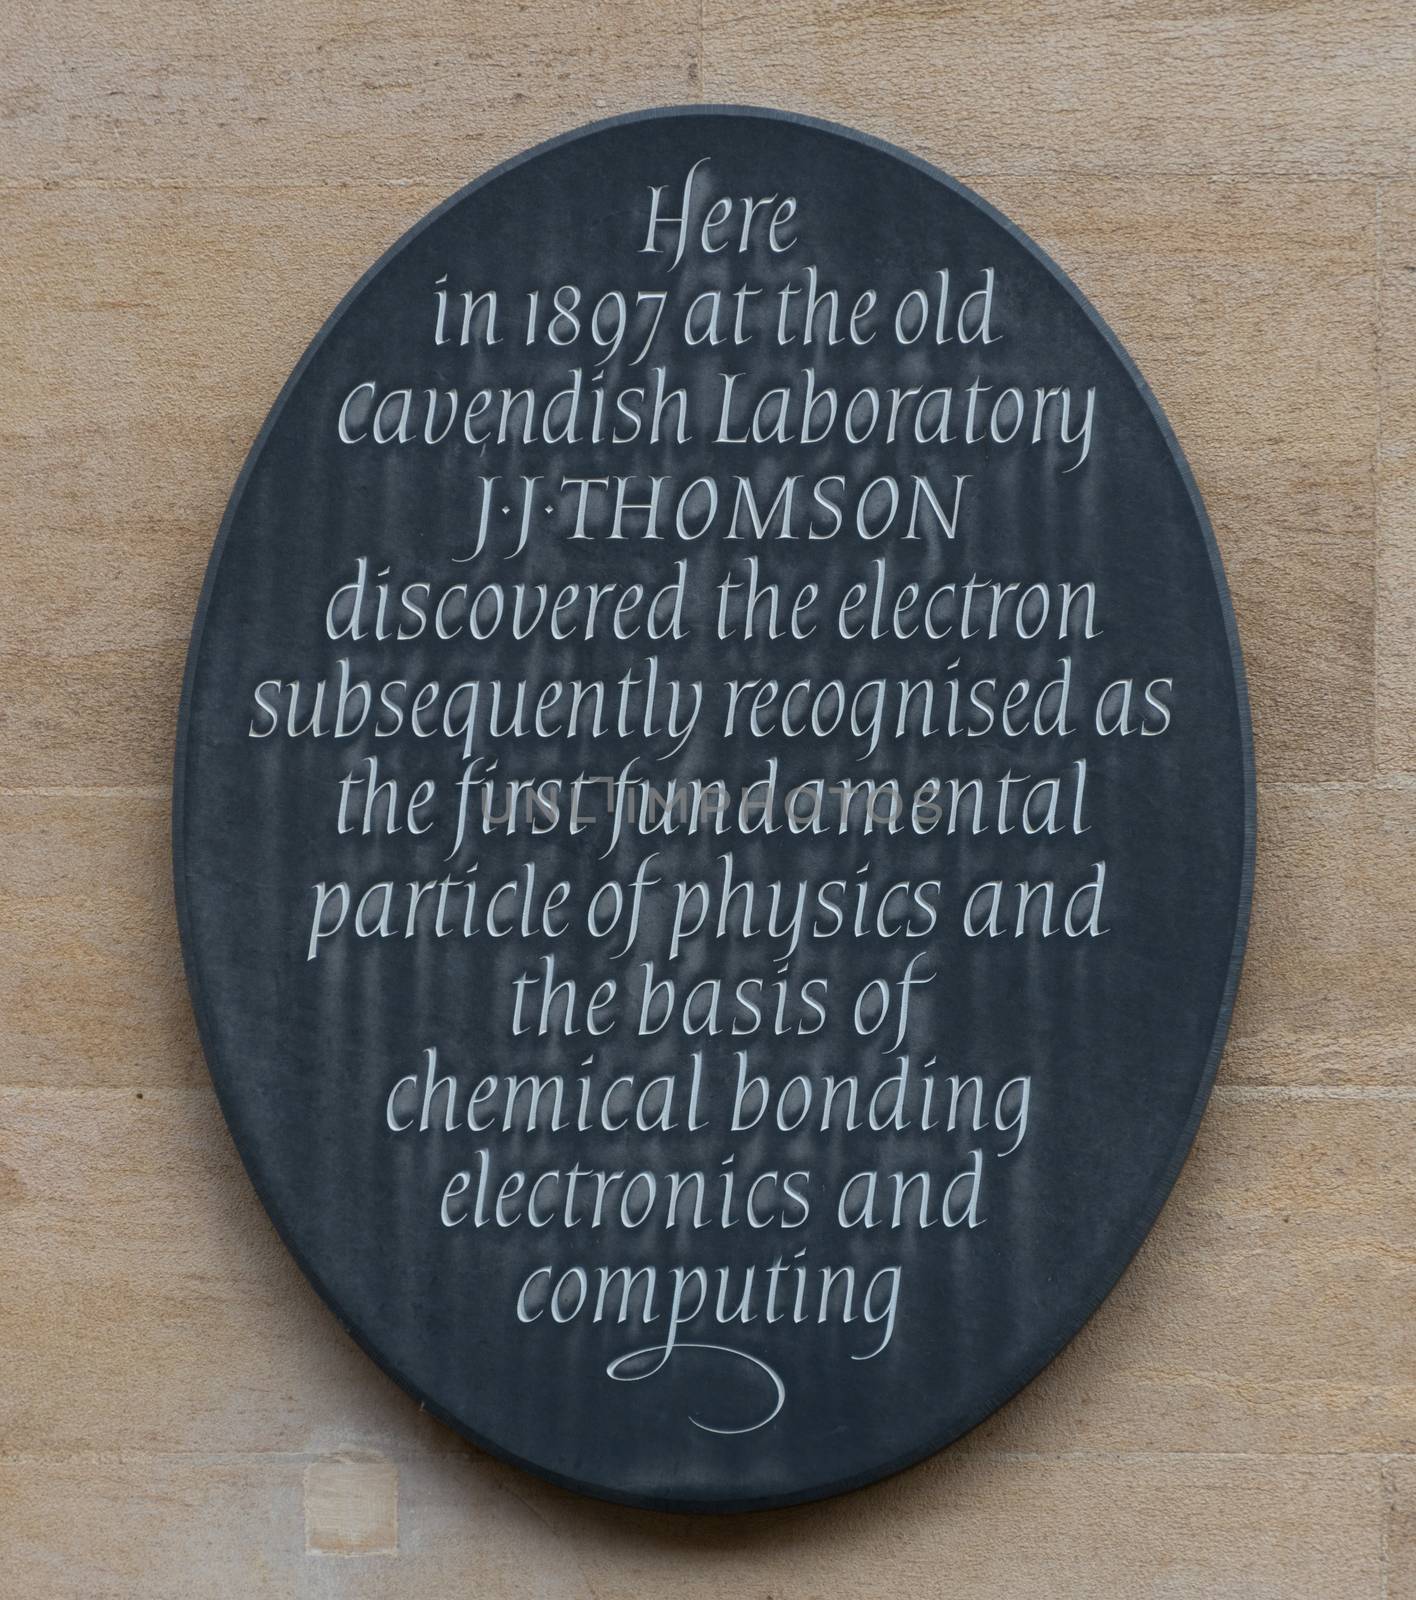 J J Thomson Plaque by TimAwe